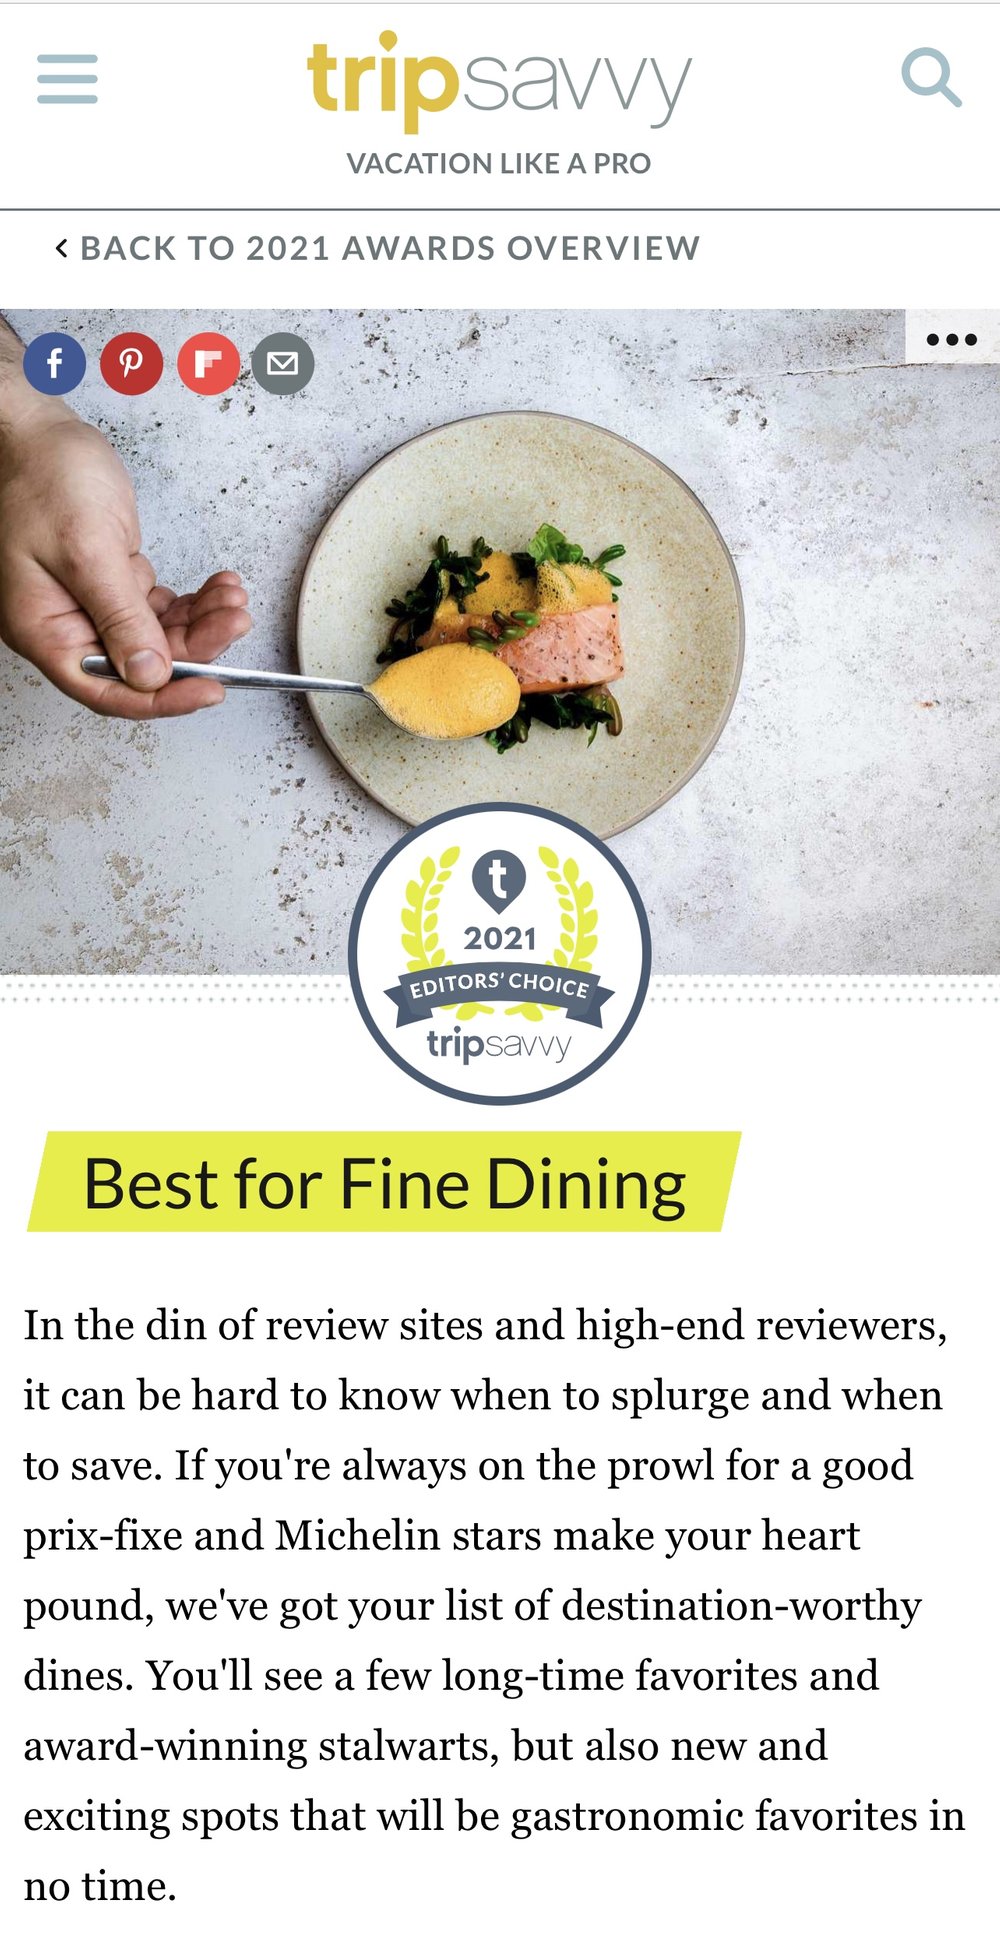 Best for Fine Dining (1 Article)